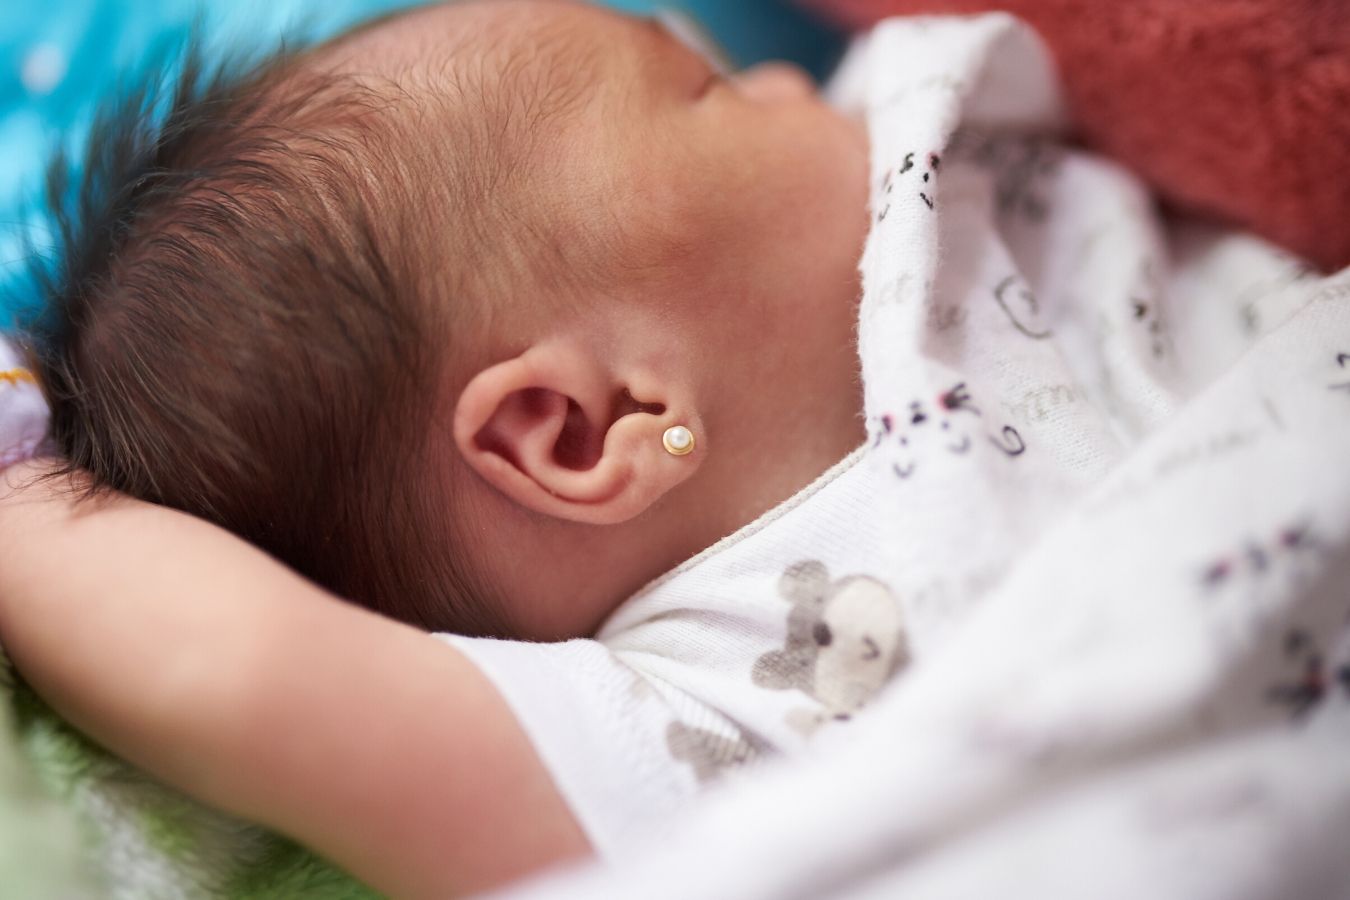 All About Piercing a Baby's Ears 